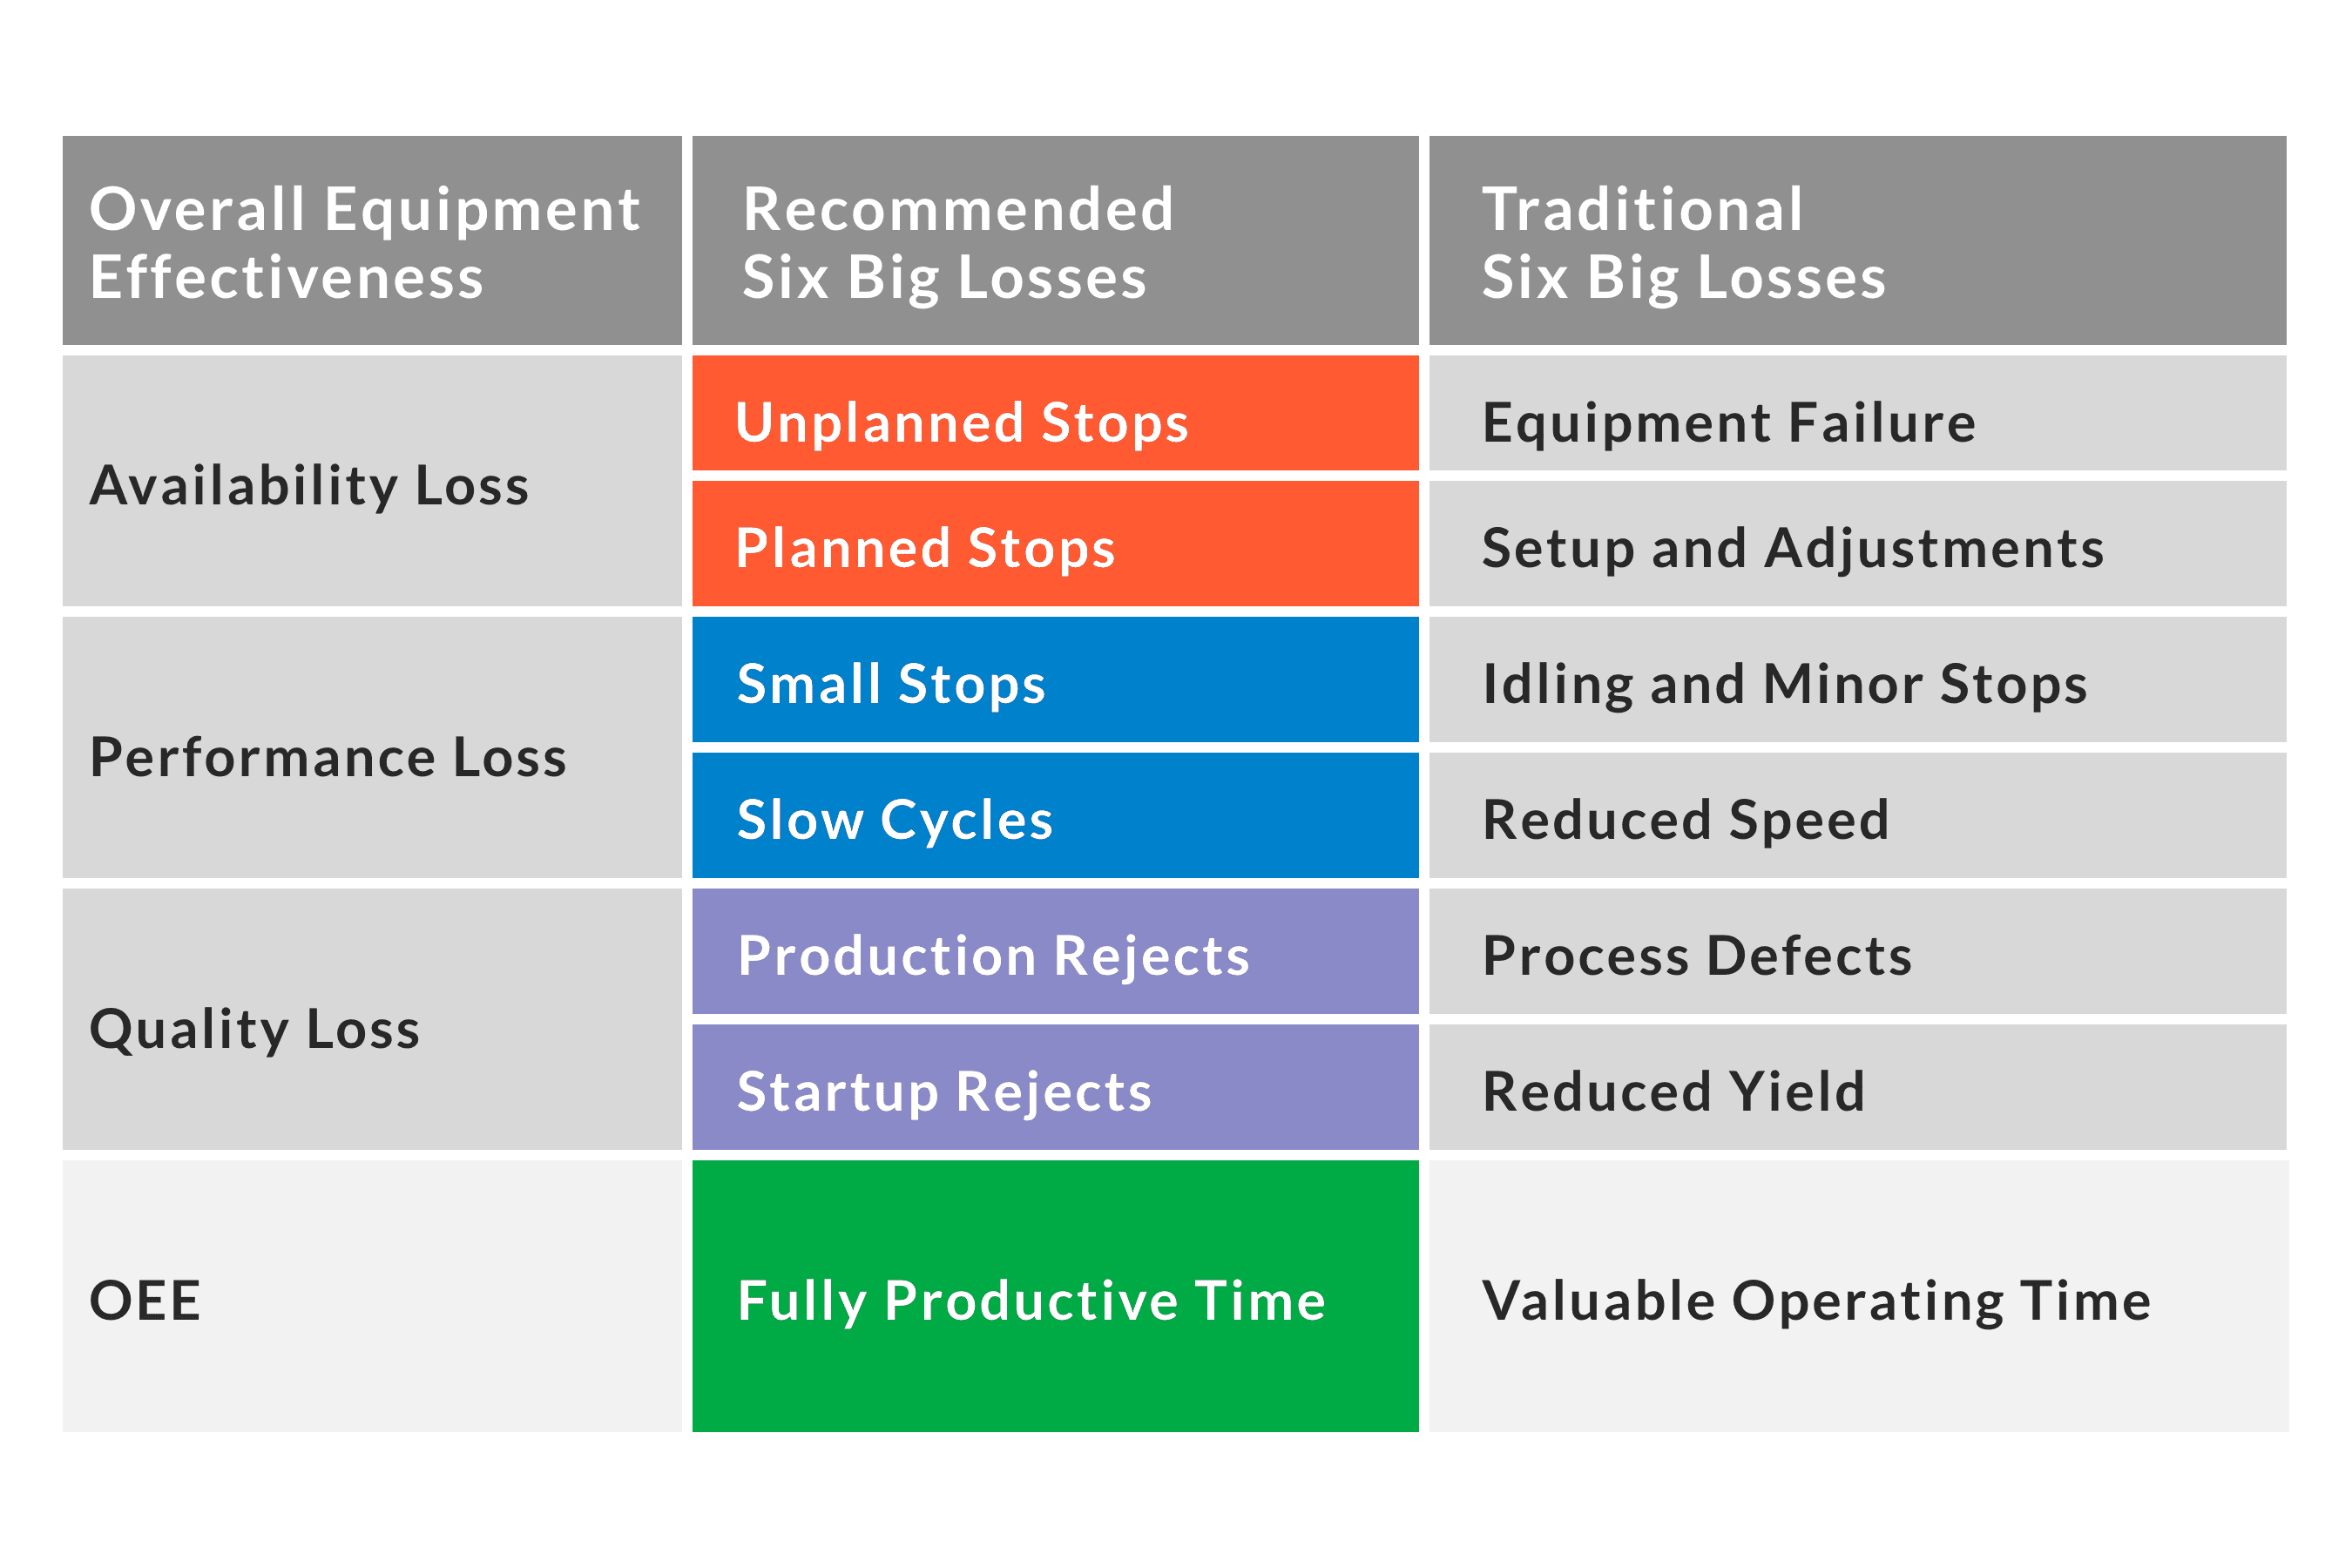 OEE Loss factors (Availability, Performance, and Quality) align to the Six Big Losses